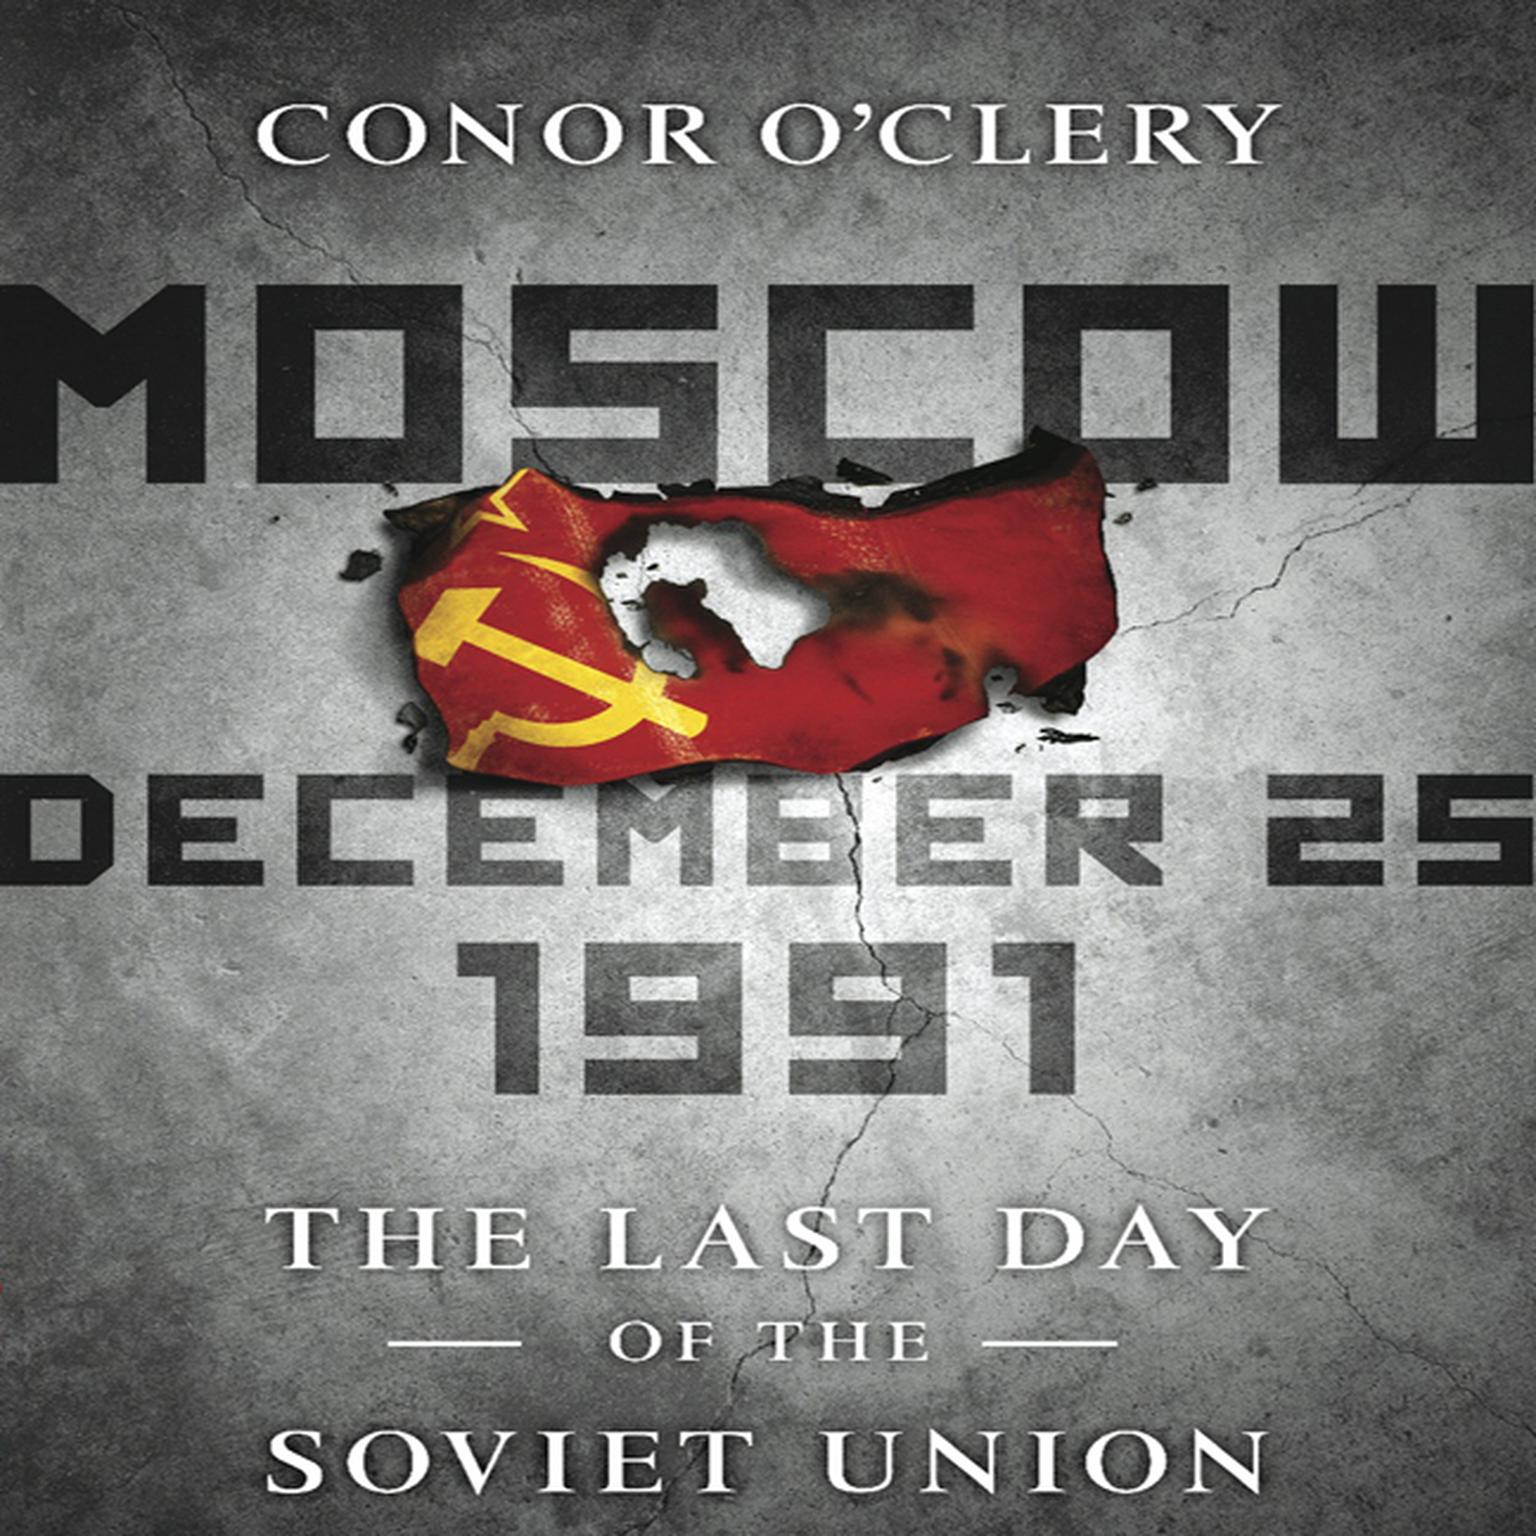 Moscow, December 25,1991: The Last Day of the Soviet Union Audiobook, by Conor O’Clery